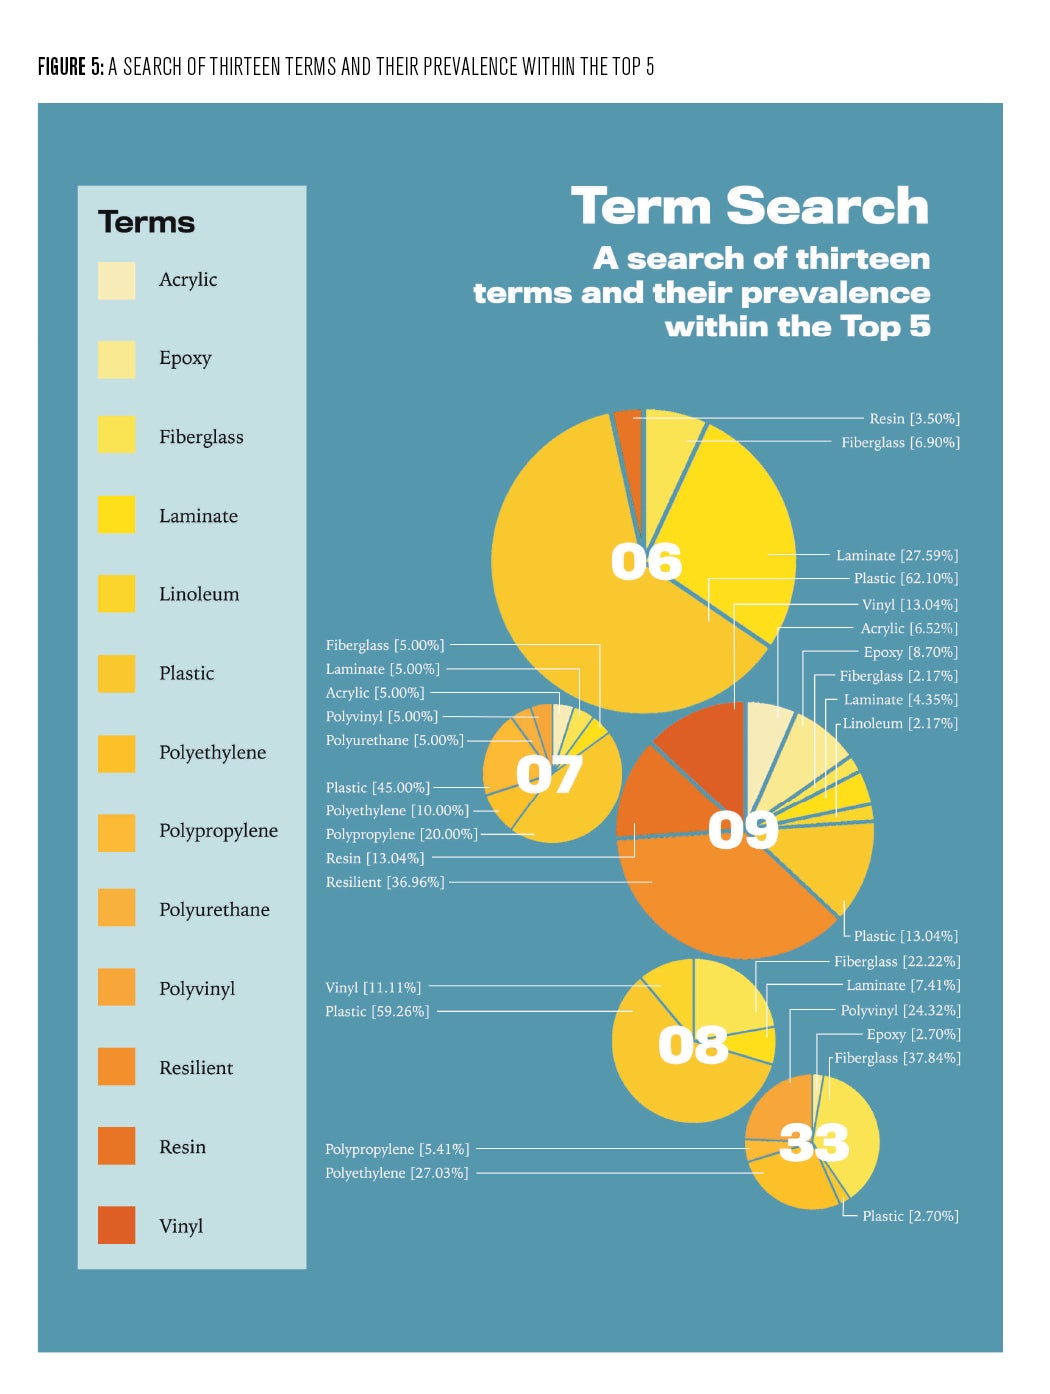 Figure 5: Term Search, A search of thirteen terms and their prevalence within the Top 5